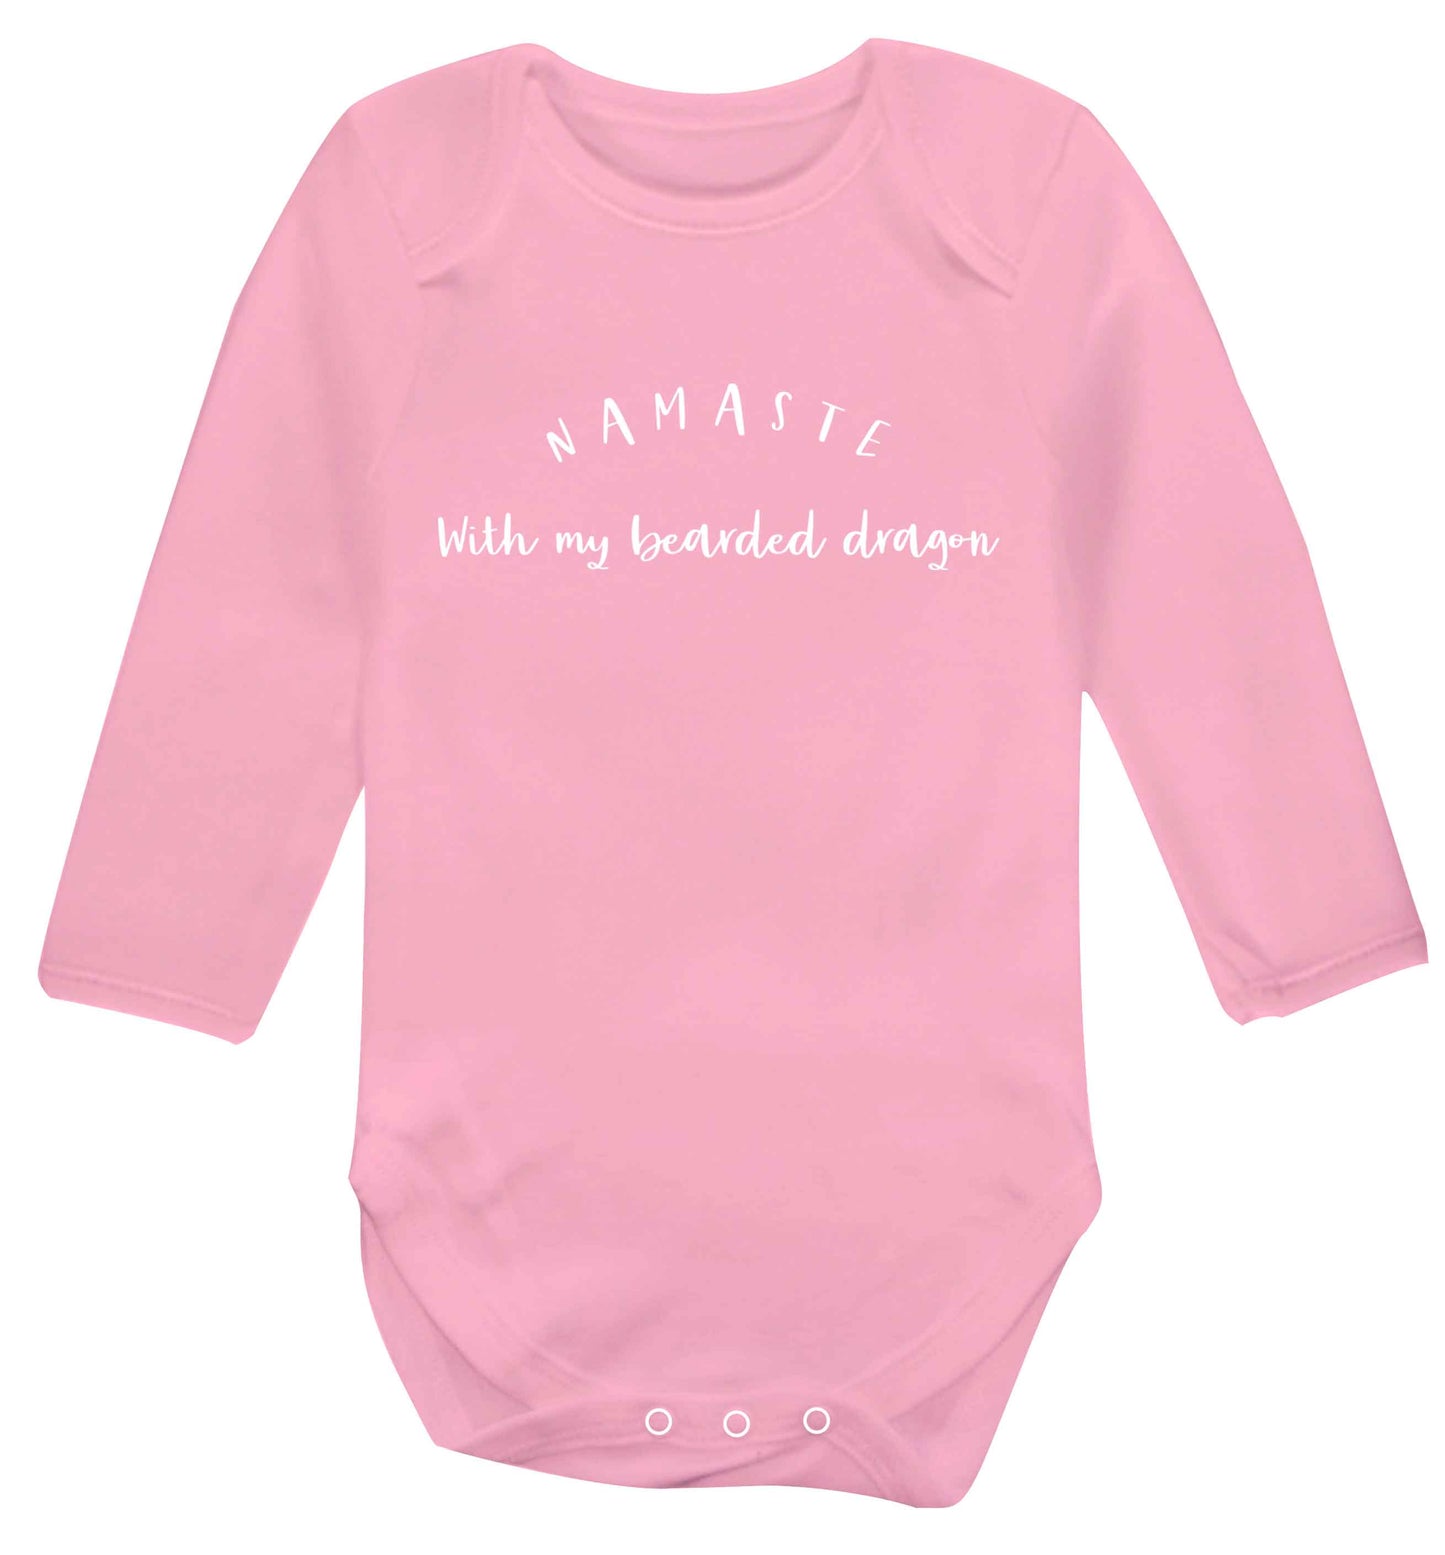 Namaste with my bearded dragon Baby Vest long sleeved pale pink 6-12 months